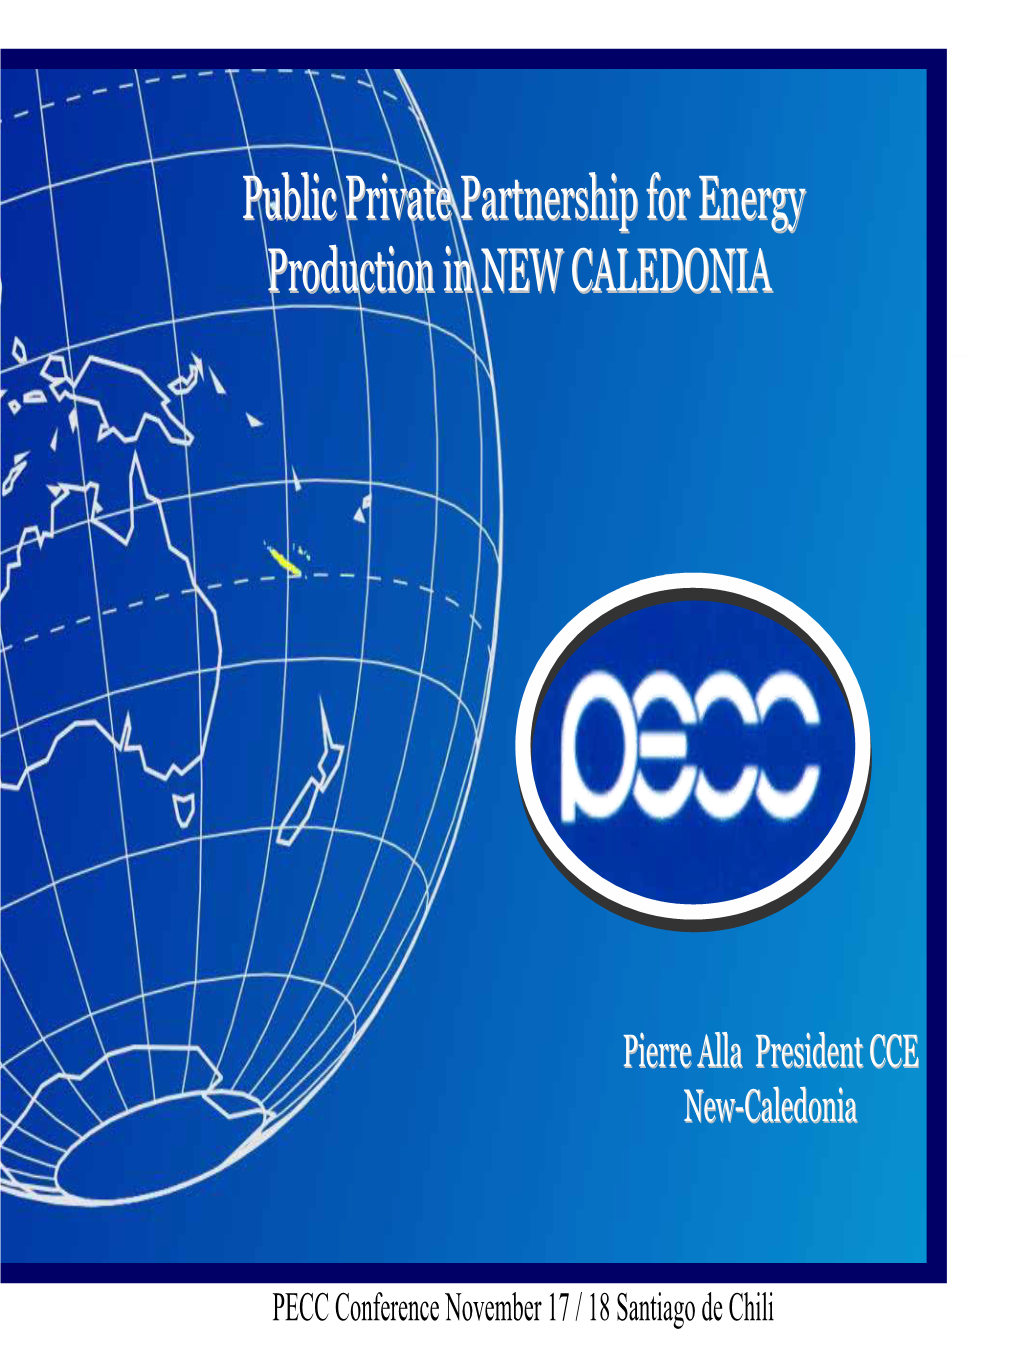 Public Private Partnership for Energy Production in NEW CALEDONIA